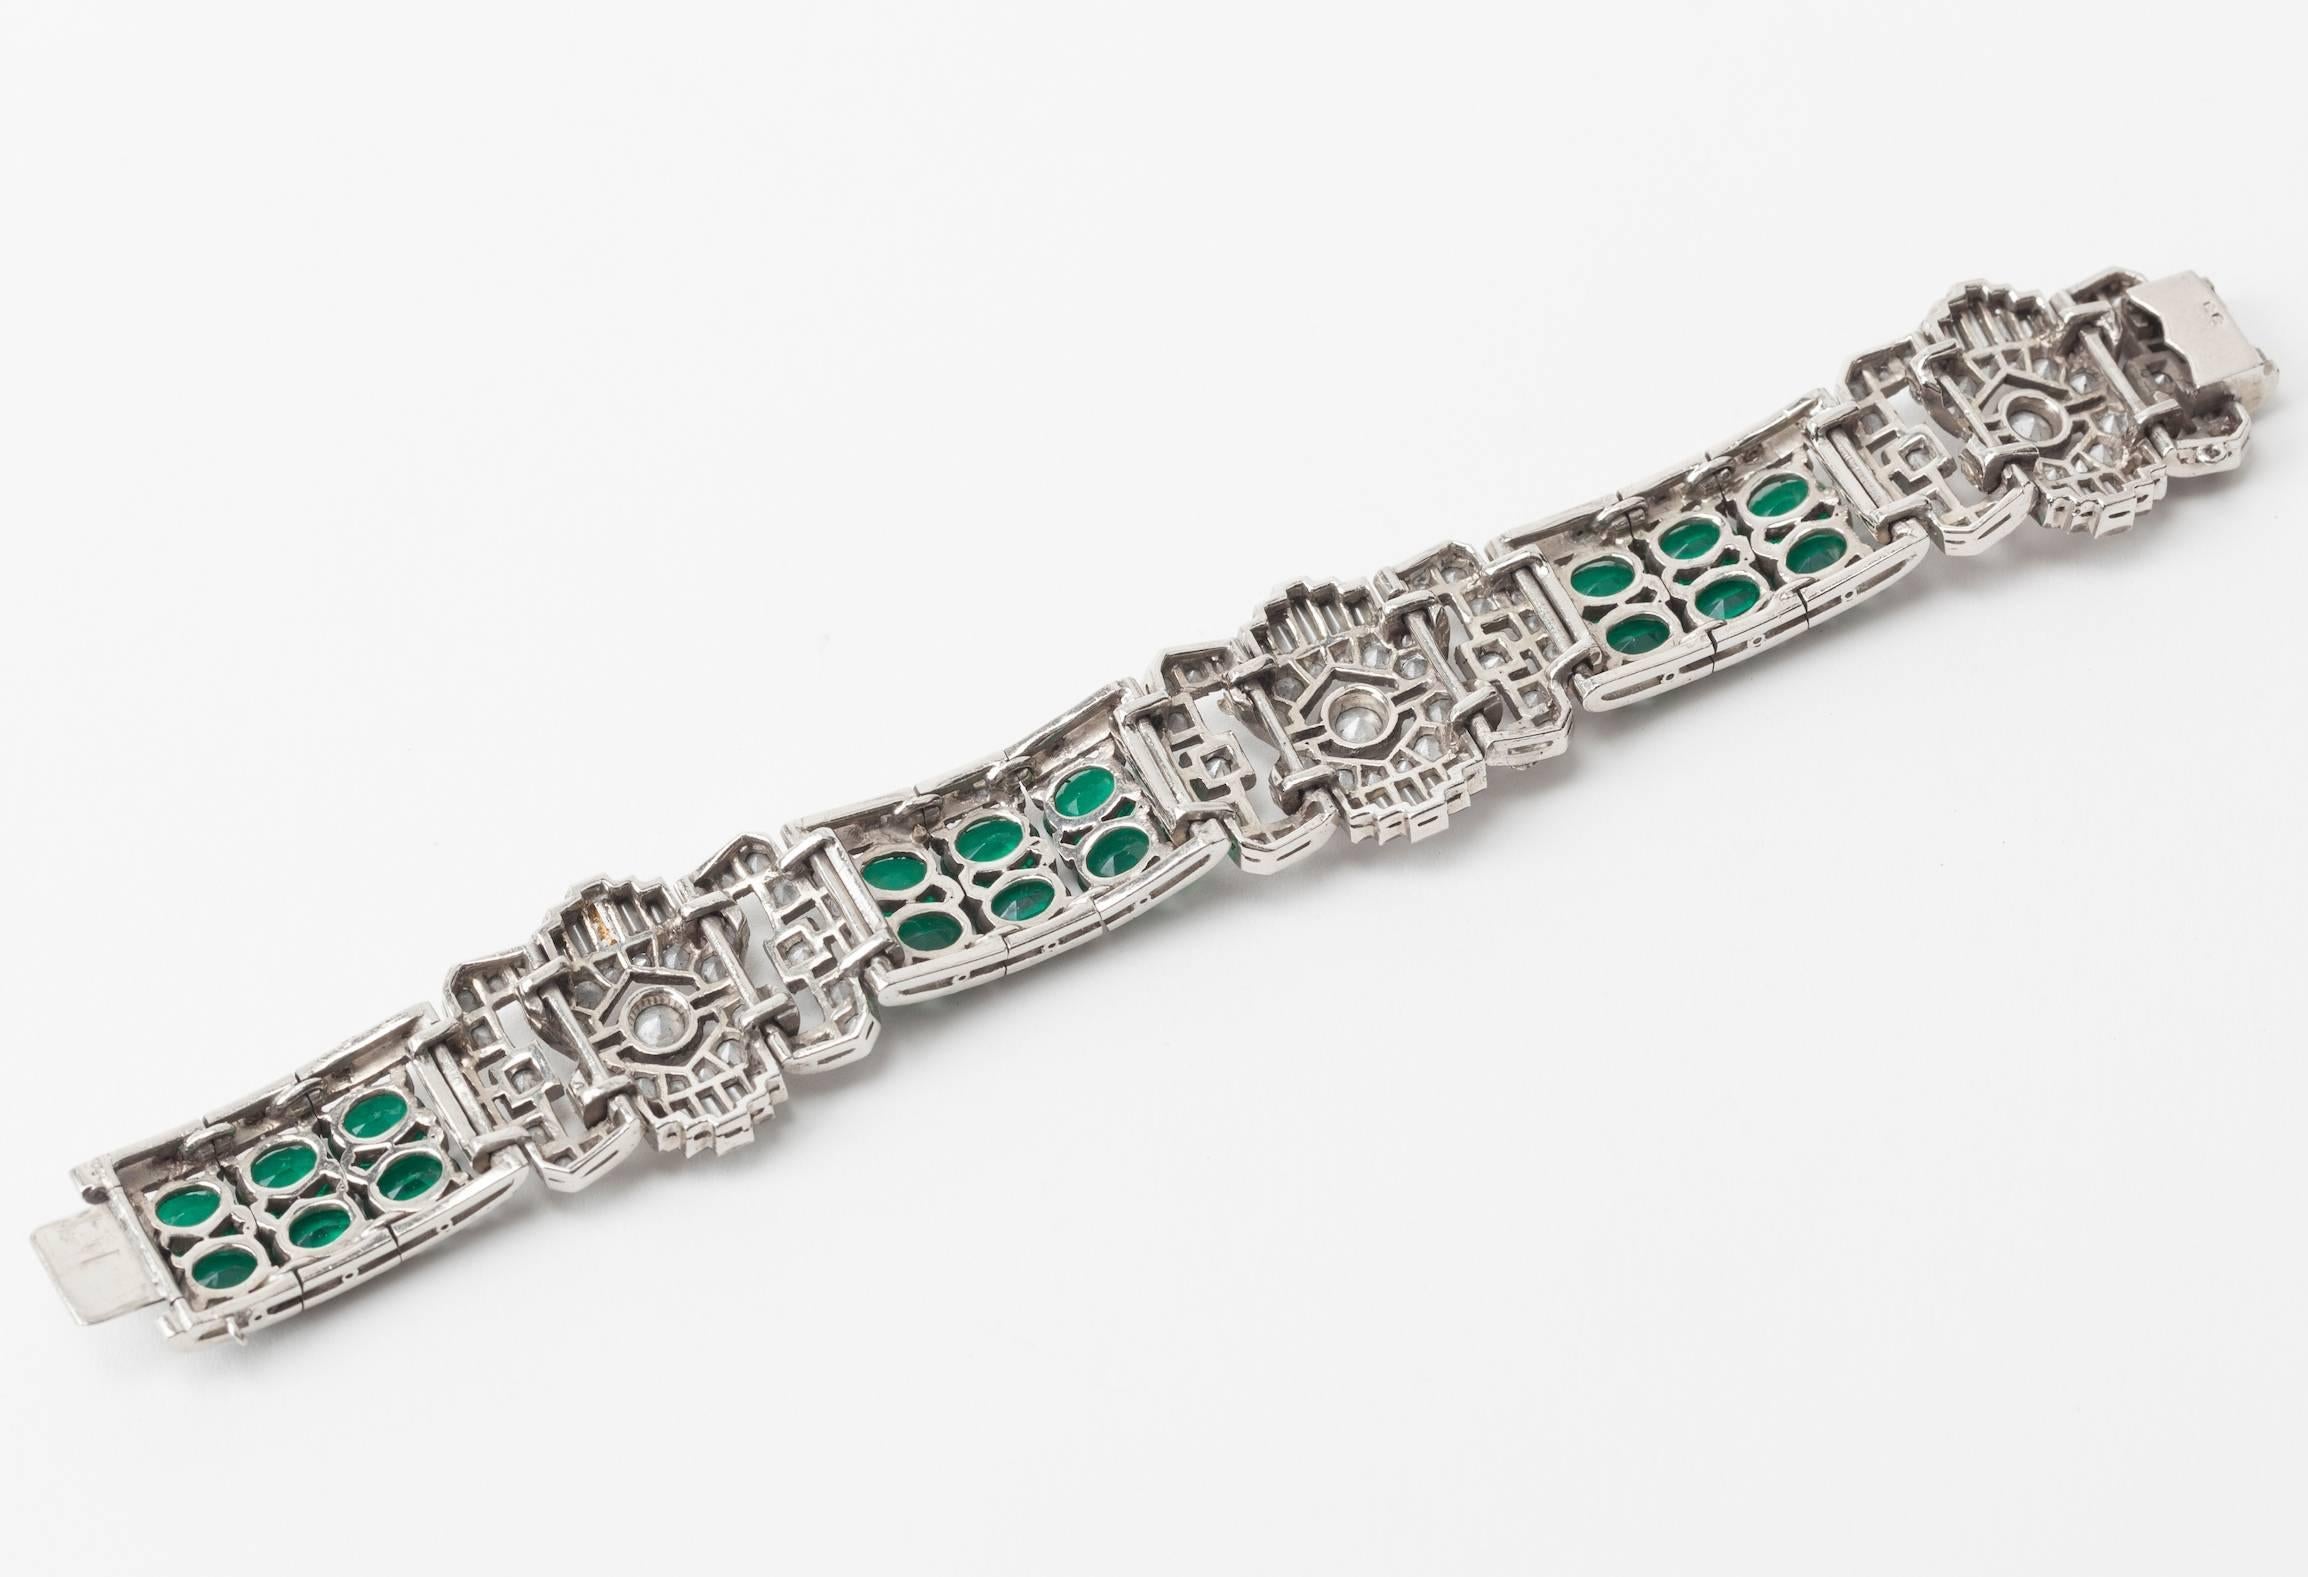 French Art Deco faux emerald paste bracelet from the 1920's. Beautifully crafted with 3 alternating stations of pave and baguette crystal links and oval faux emeralds. HIgh Art Deco styling and articulated construction. French silver hallmarks.